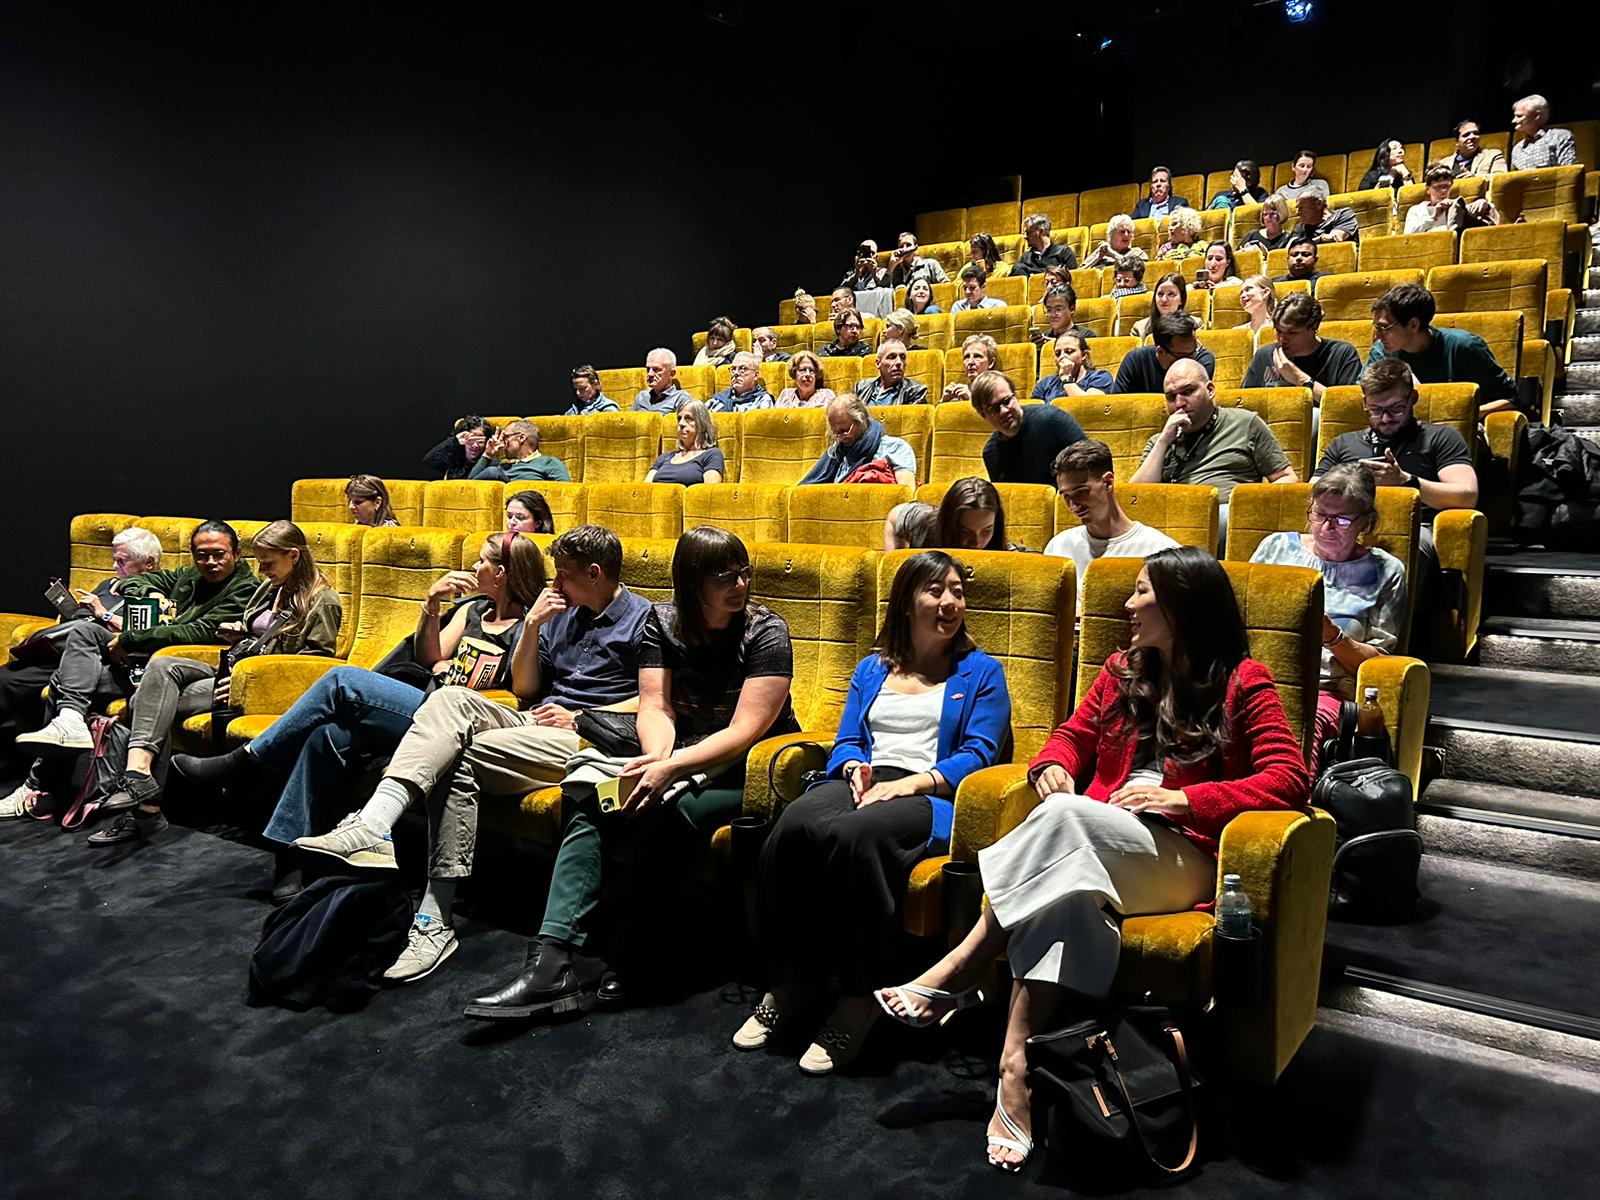 Audience at the opening film of the Hong Kong Window section dedicated to Hong Kong films at the Zurich Film Festival on September 29 (Zurich time).